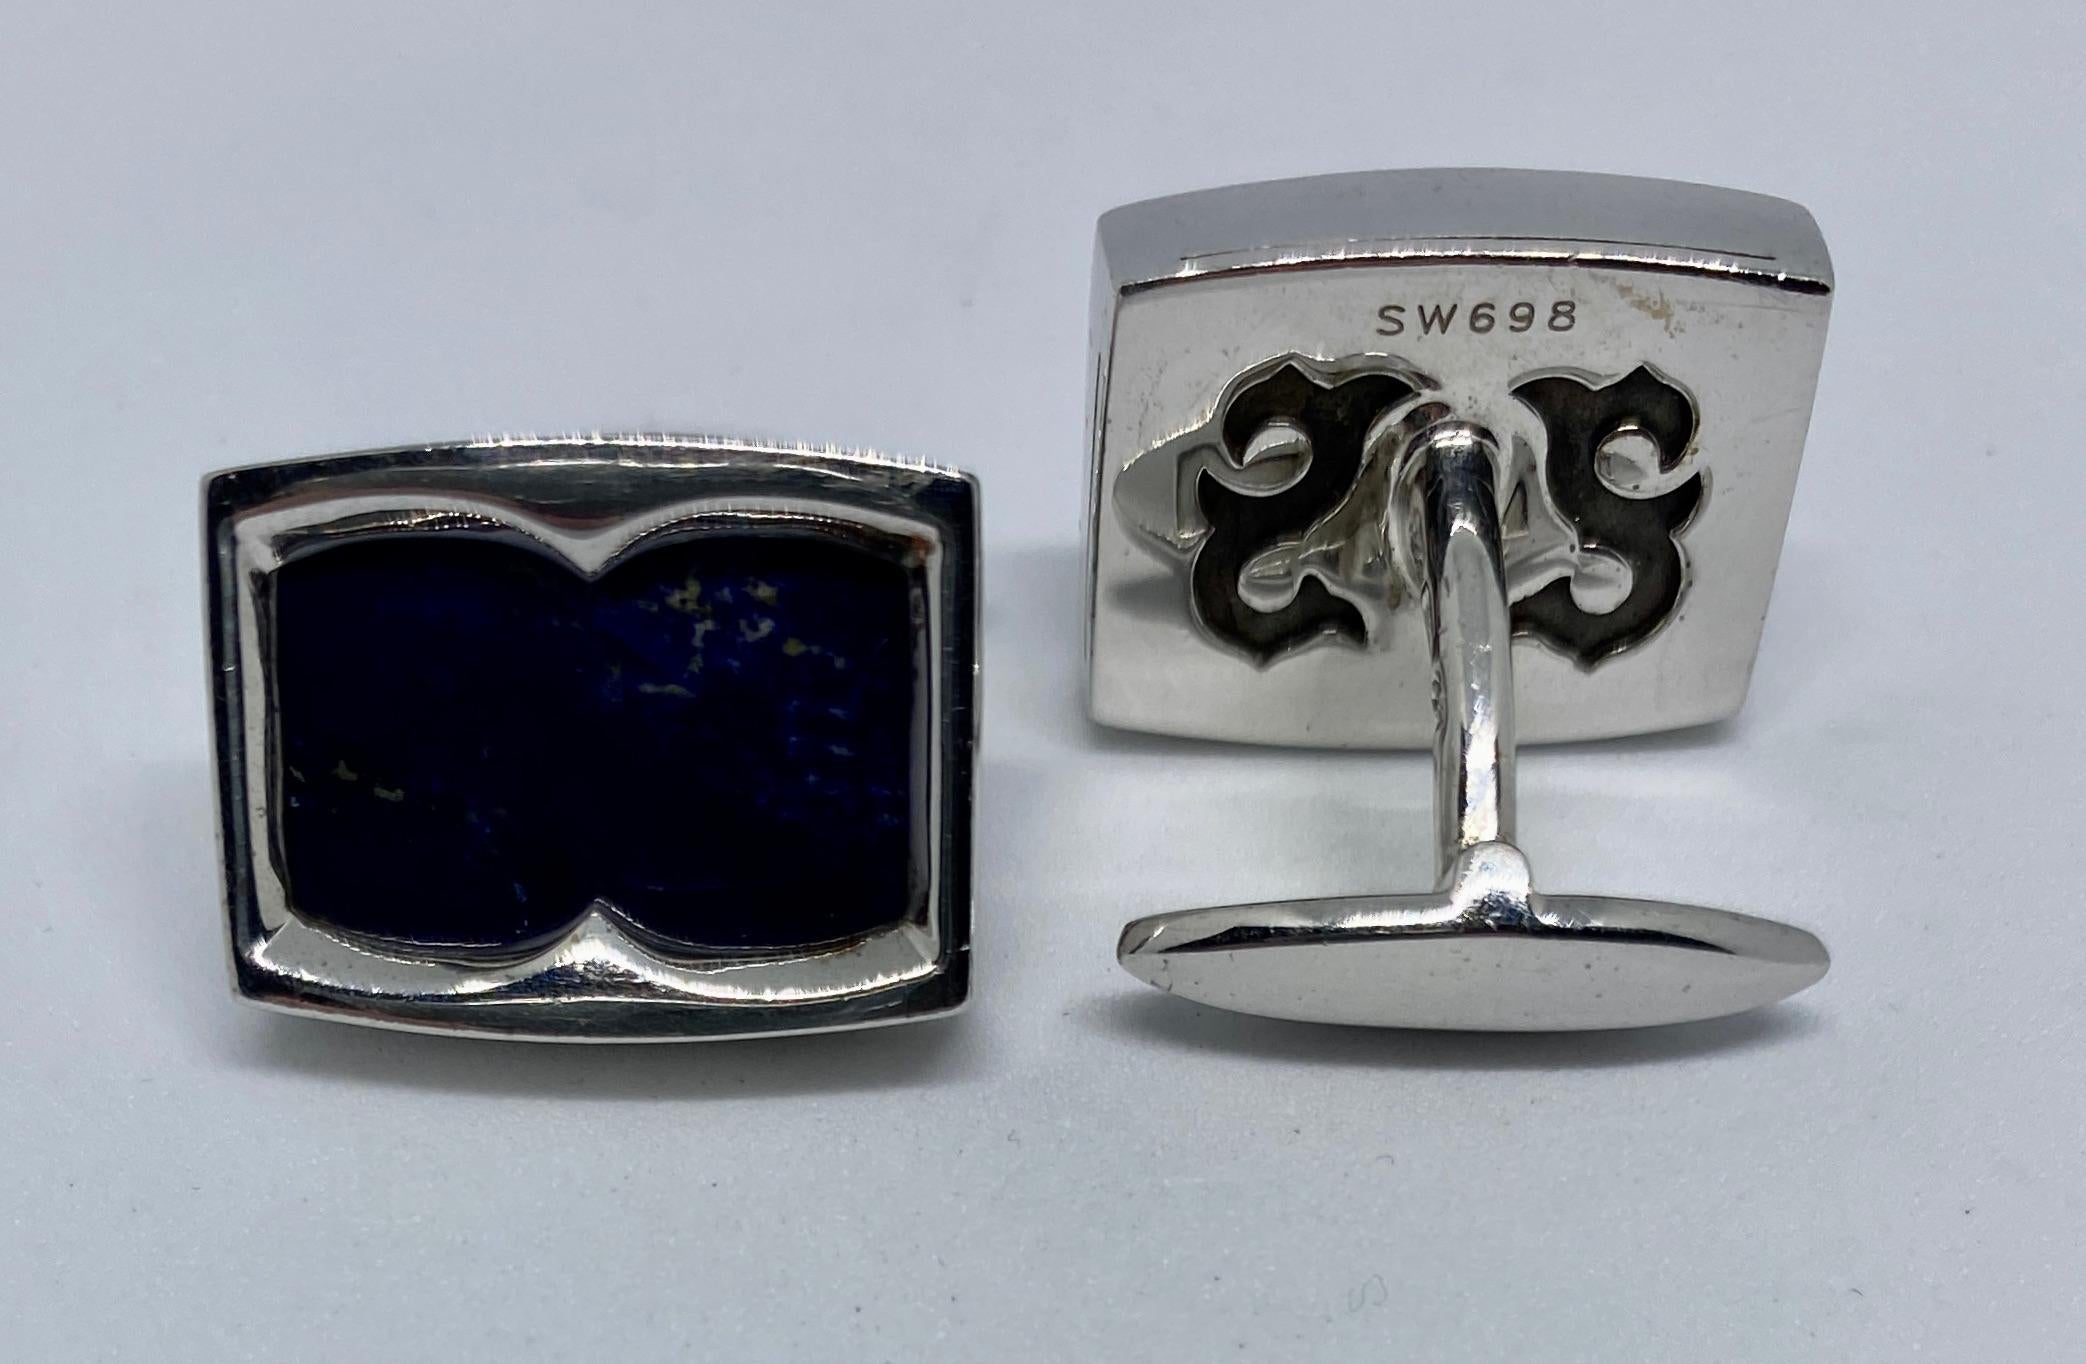 A handsome and distinctive pair of cufflinks from the 